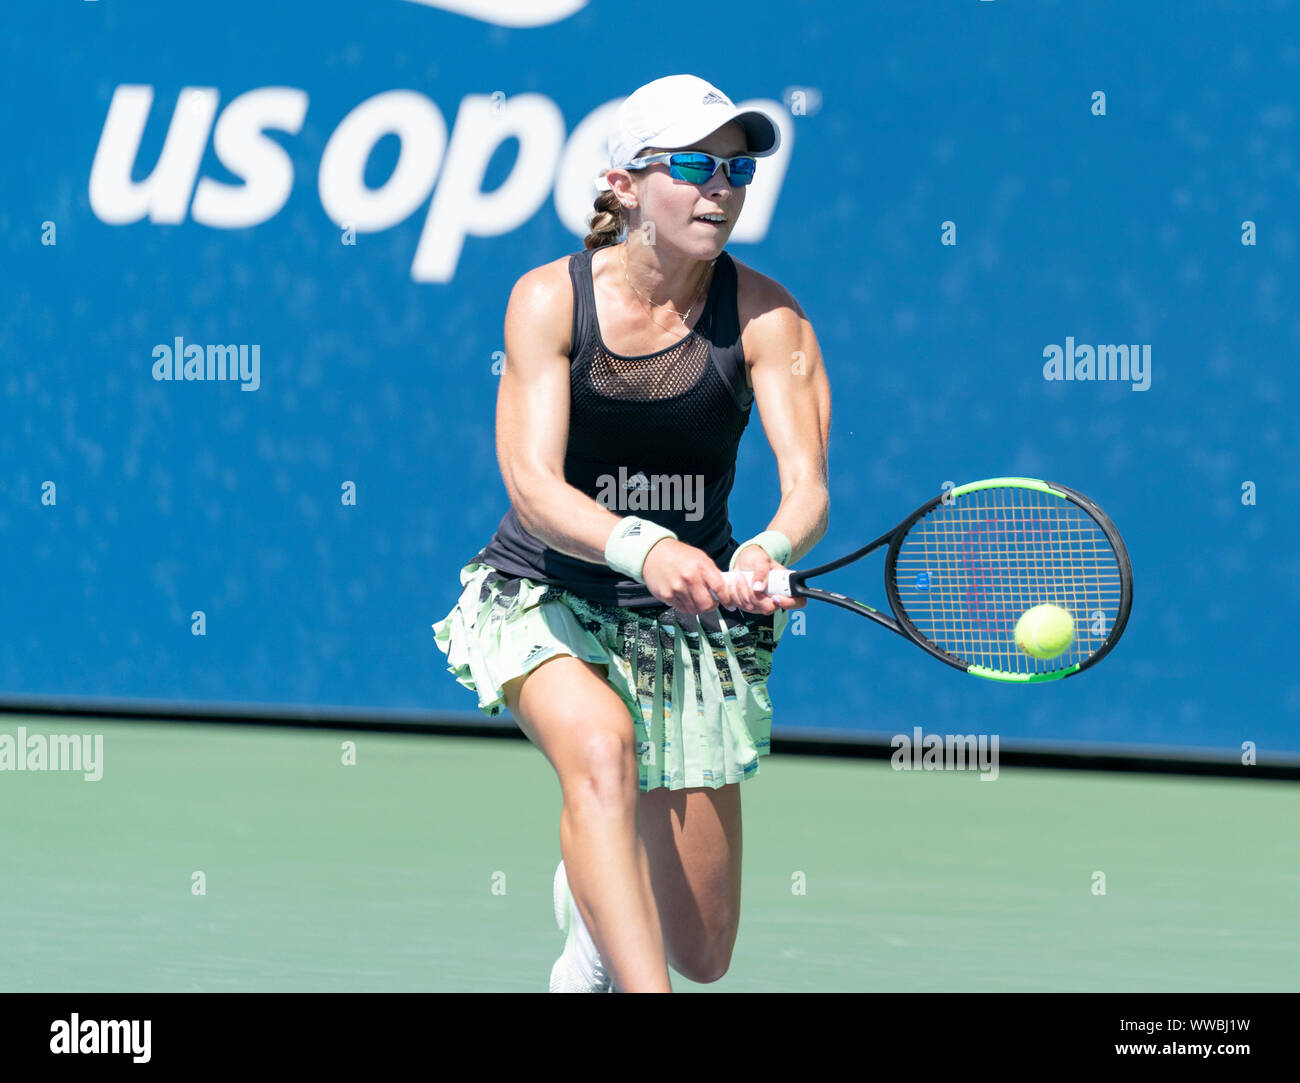 New York, NY - September 3, 2019: Katie Volynets (USA) in action during 1st  round of US Open Championship girls juniors against Carole Monnet (France)  at Billie Jean King National Tennis Center